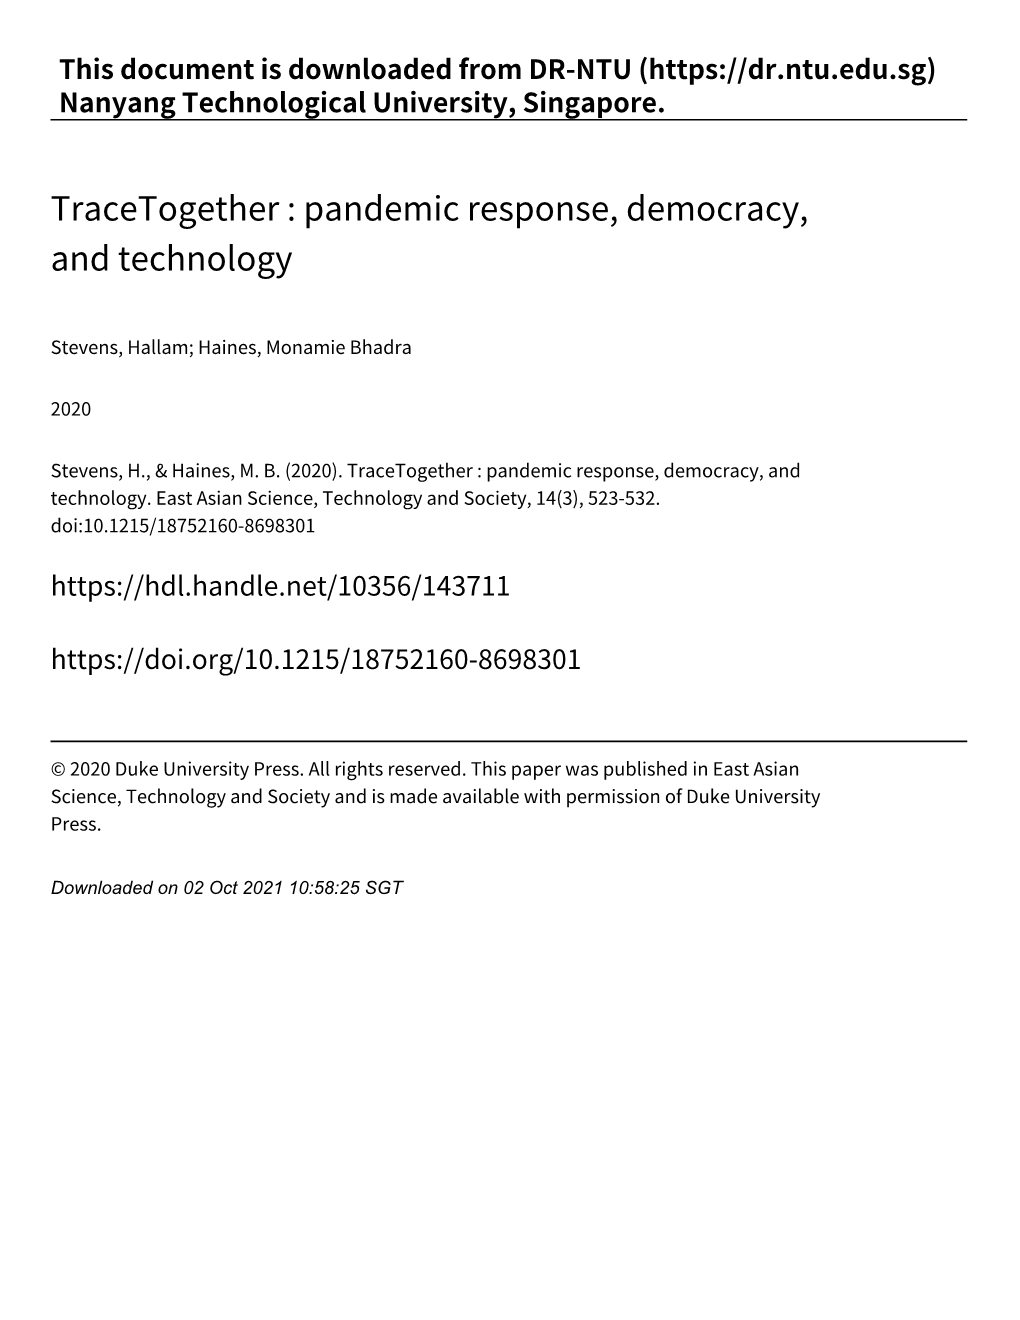 Tracetogether : Pandemic Response, Democracy, and Technology